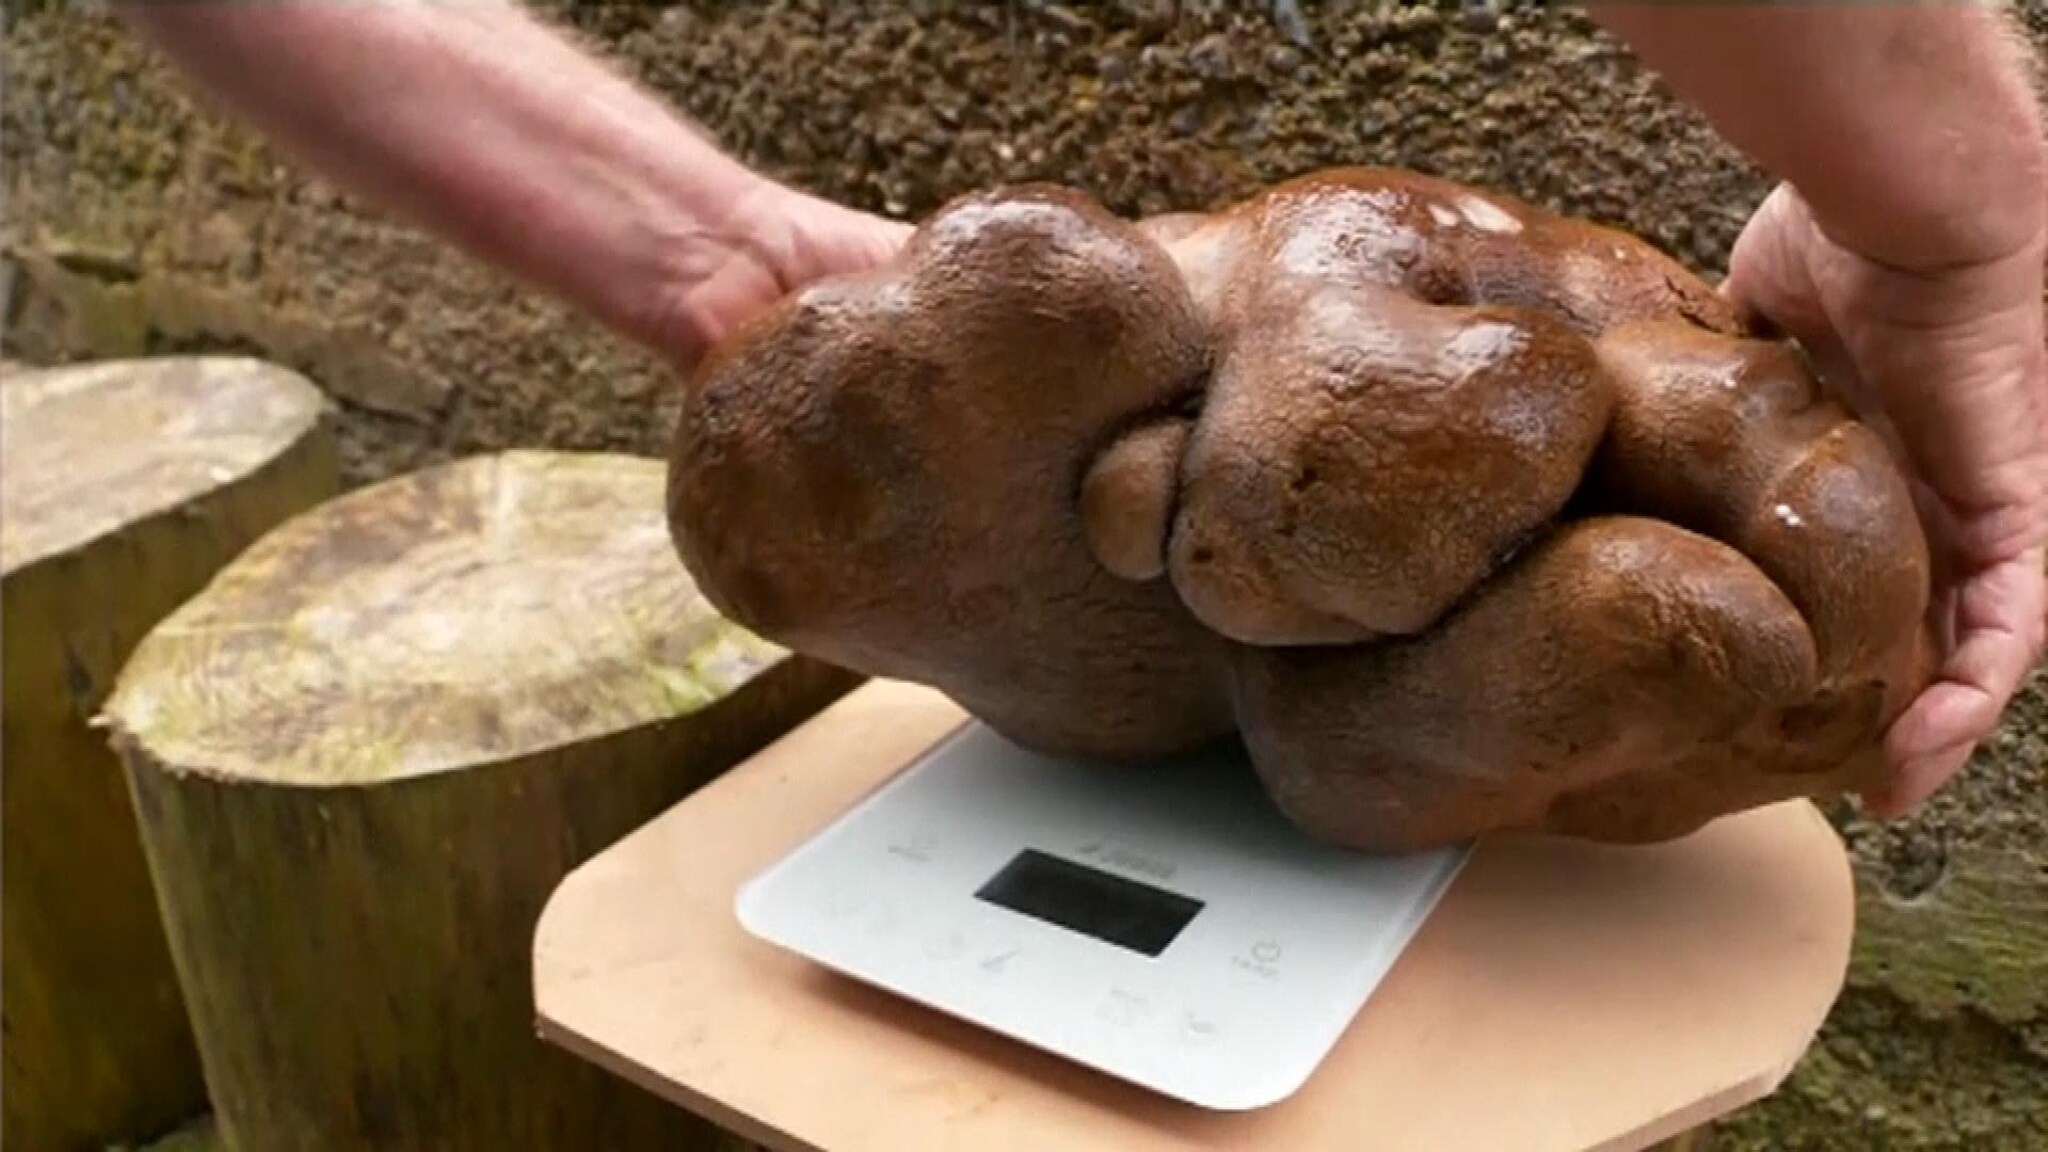 New Zealanders find huge potatoes and call them a dog